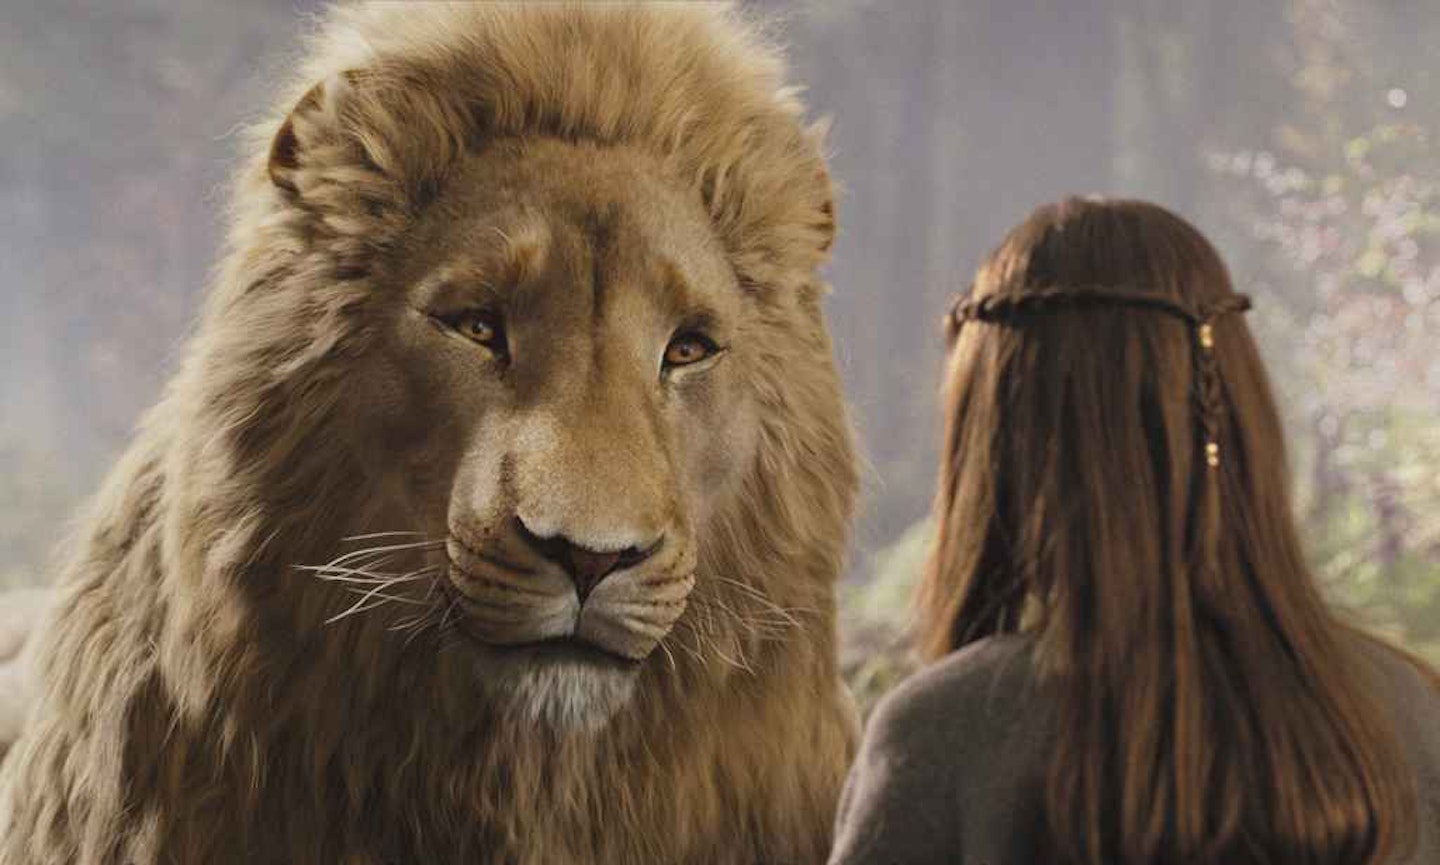 Aslan: The Chronicles of Narnia, C. S. Lewis, The Lion, the Witch